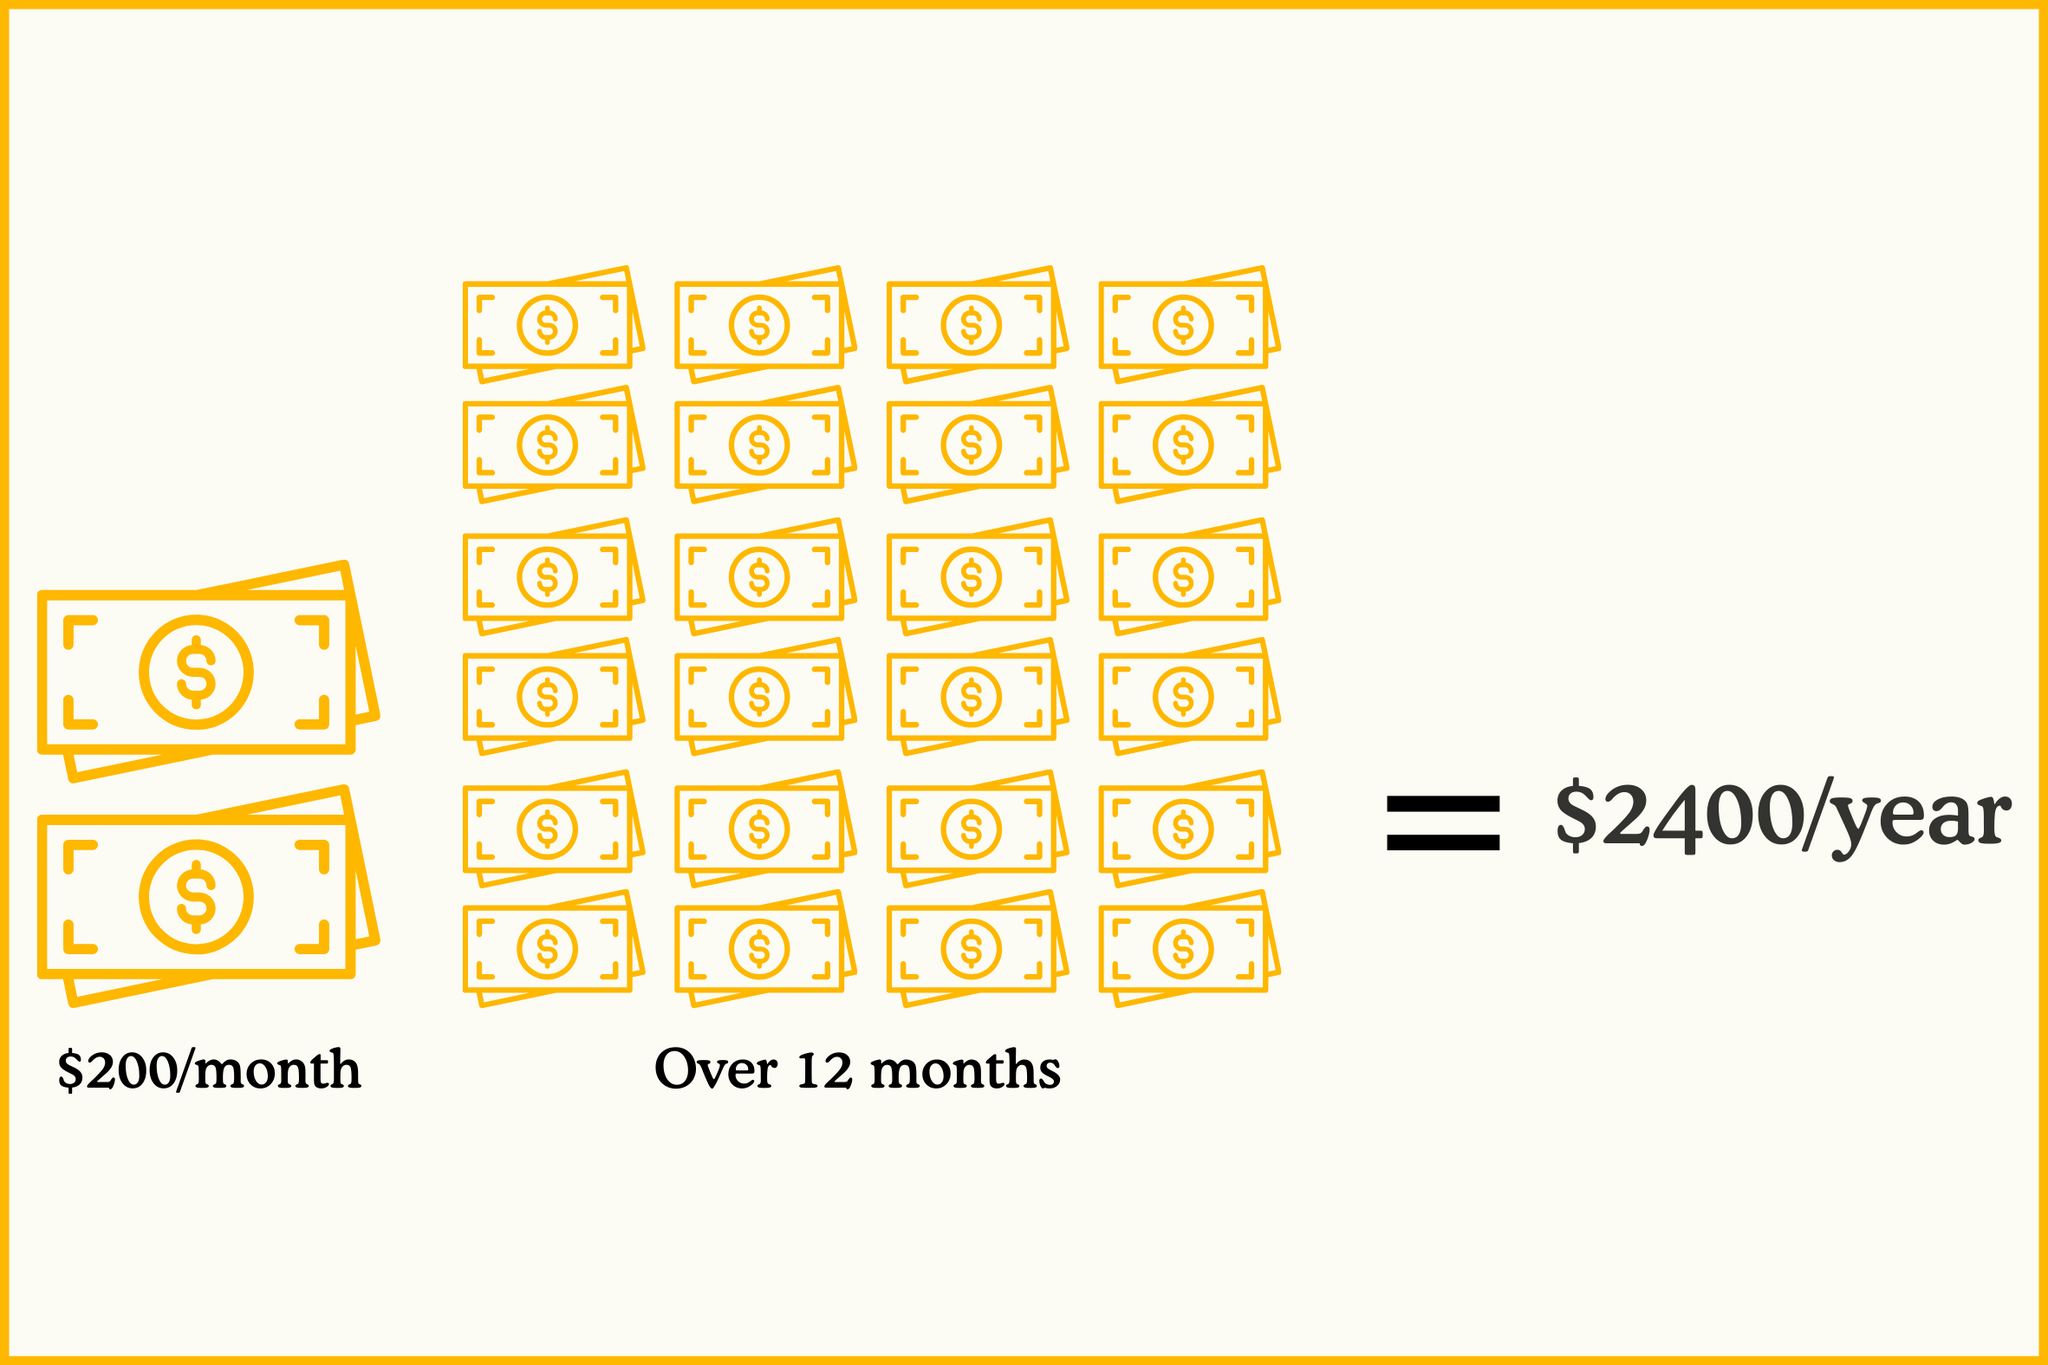 A graphical representation of the cost per year of incontinence supplies in the US.